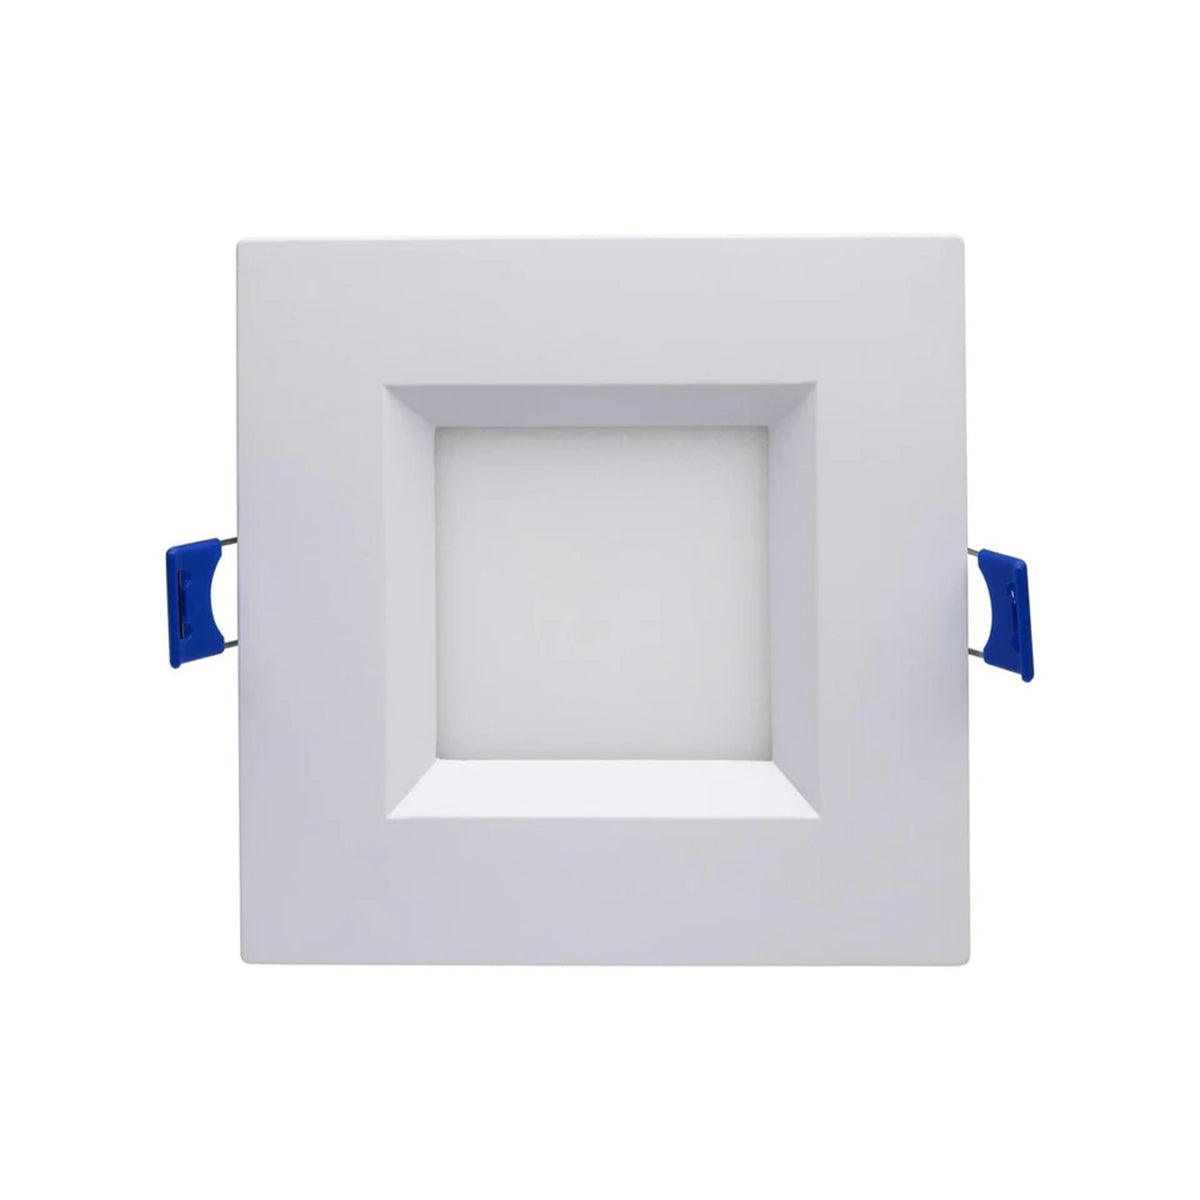 SlimFit Canless LED Recessed Light, 4 Inch, Square, 12 Watt, 750 Lumens, Selectable CCT, 2700K to 5000K, Ultra Thin